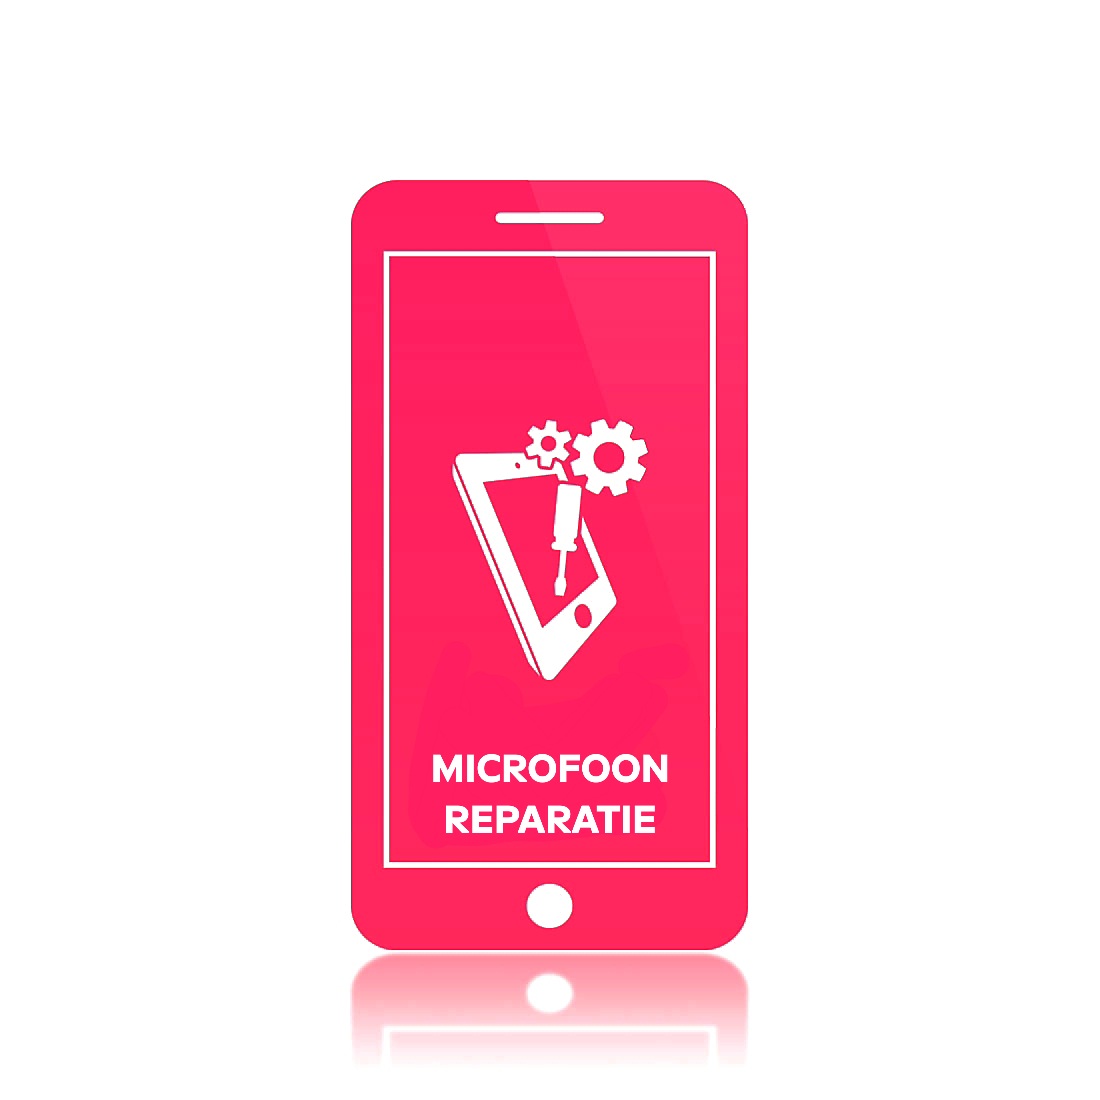 iPhone microfoon reparatie - Cell Phone